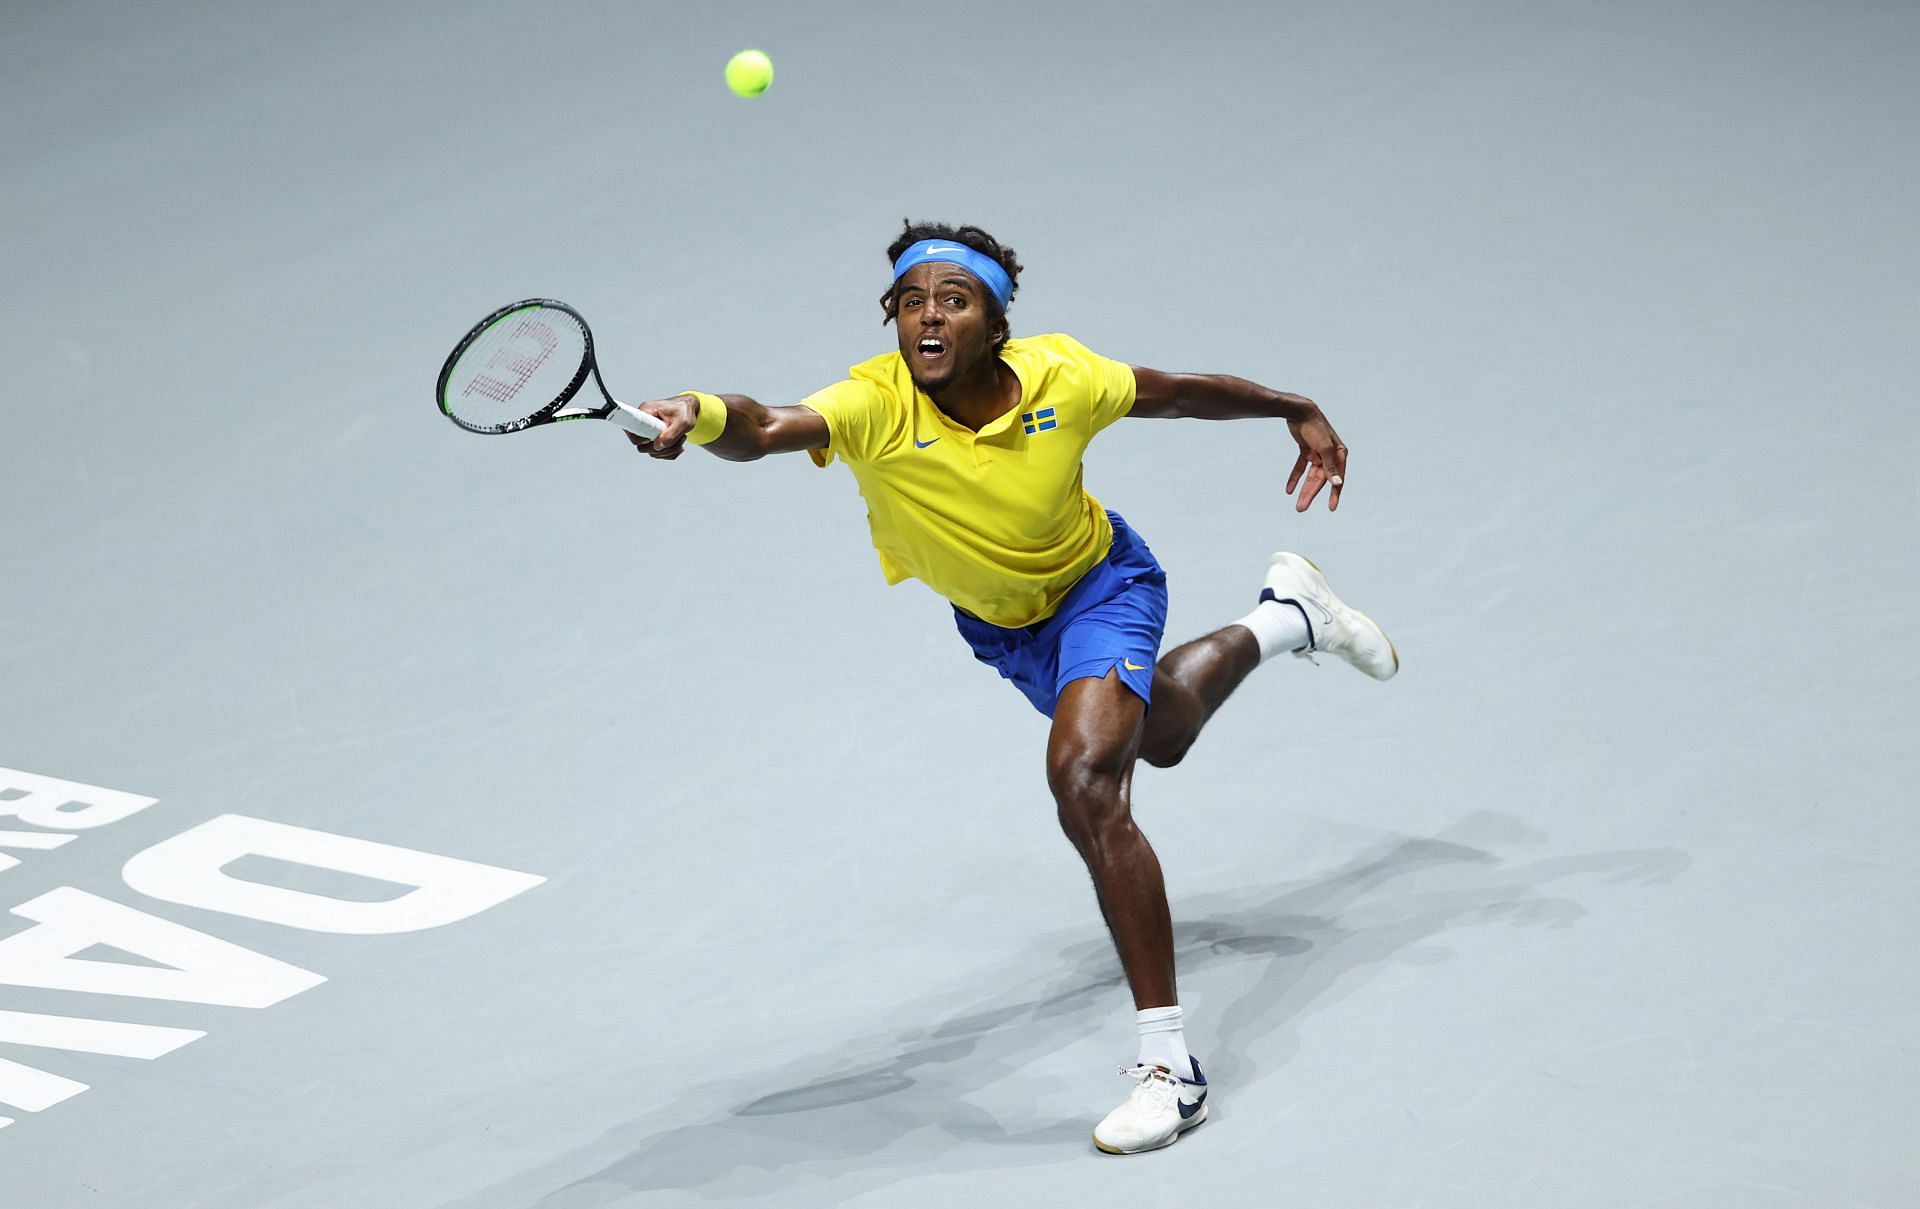 Elias Ymer at the 2021 Davis Cup.